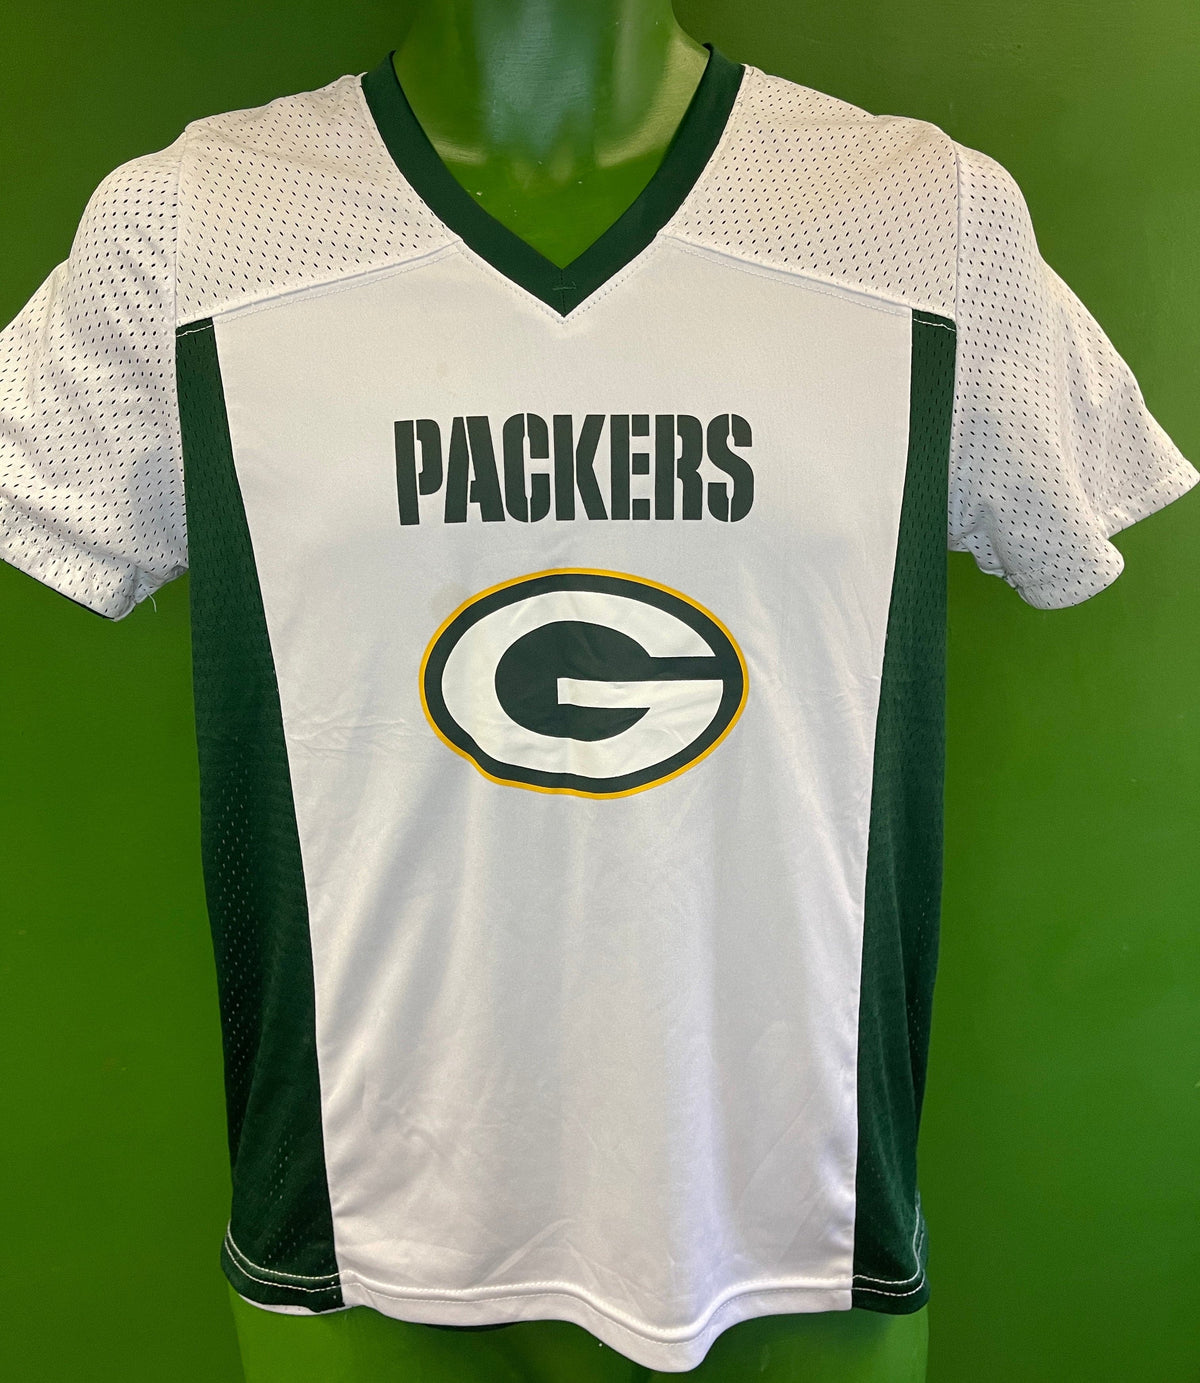 NFL Green Bay Packers Authentic Kids' Flag Football Shirt Youth Large